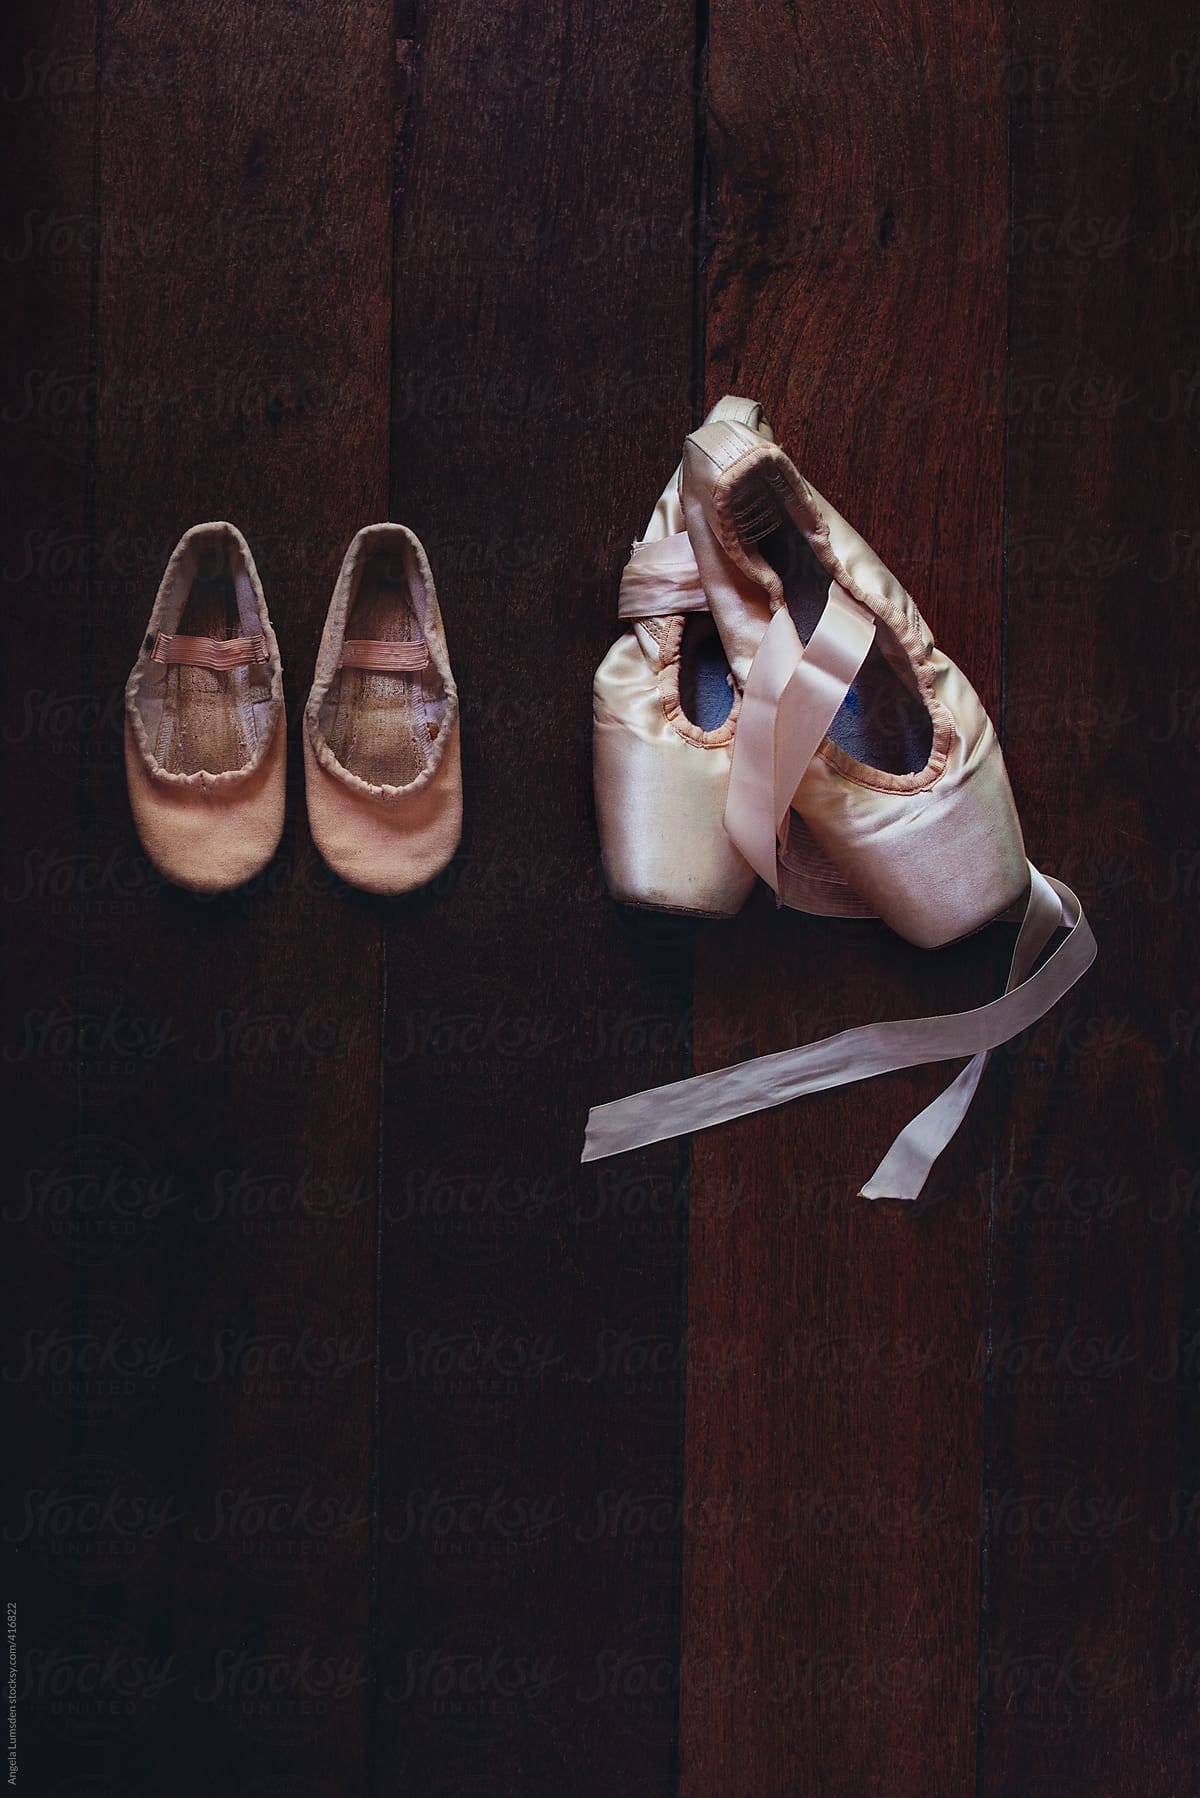 A pair of very small used ballet shoes beside a new pair of pointe shoes